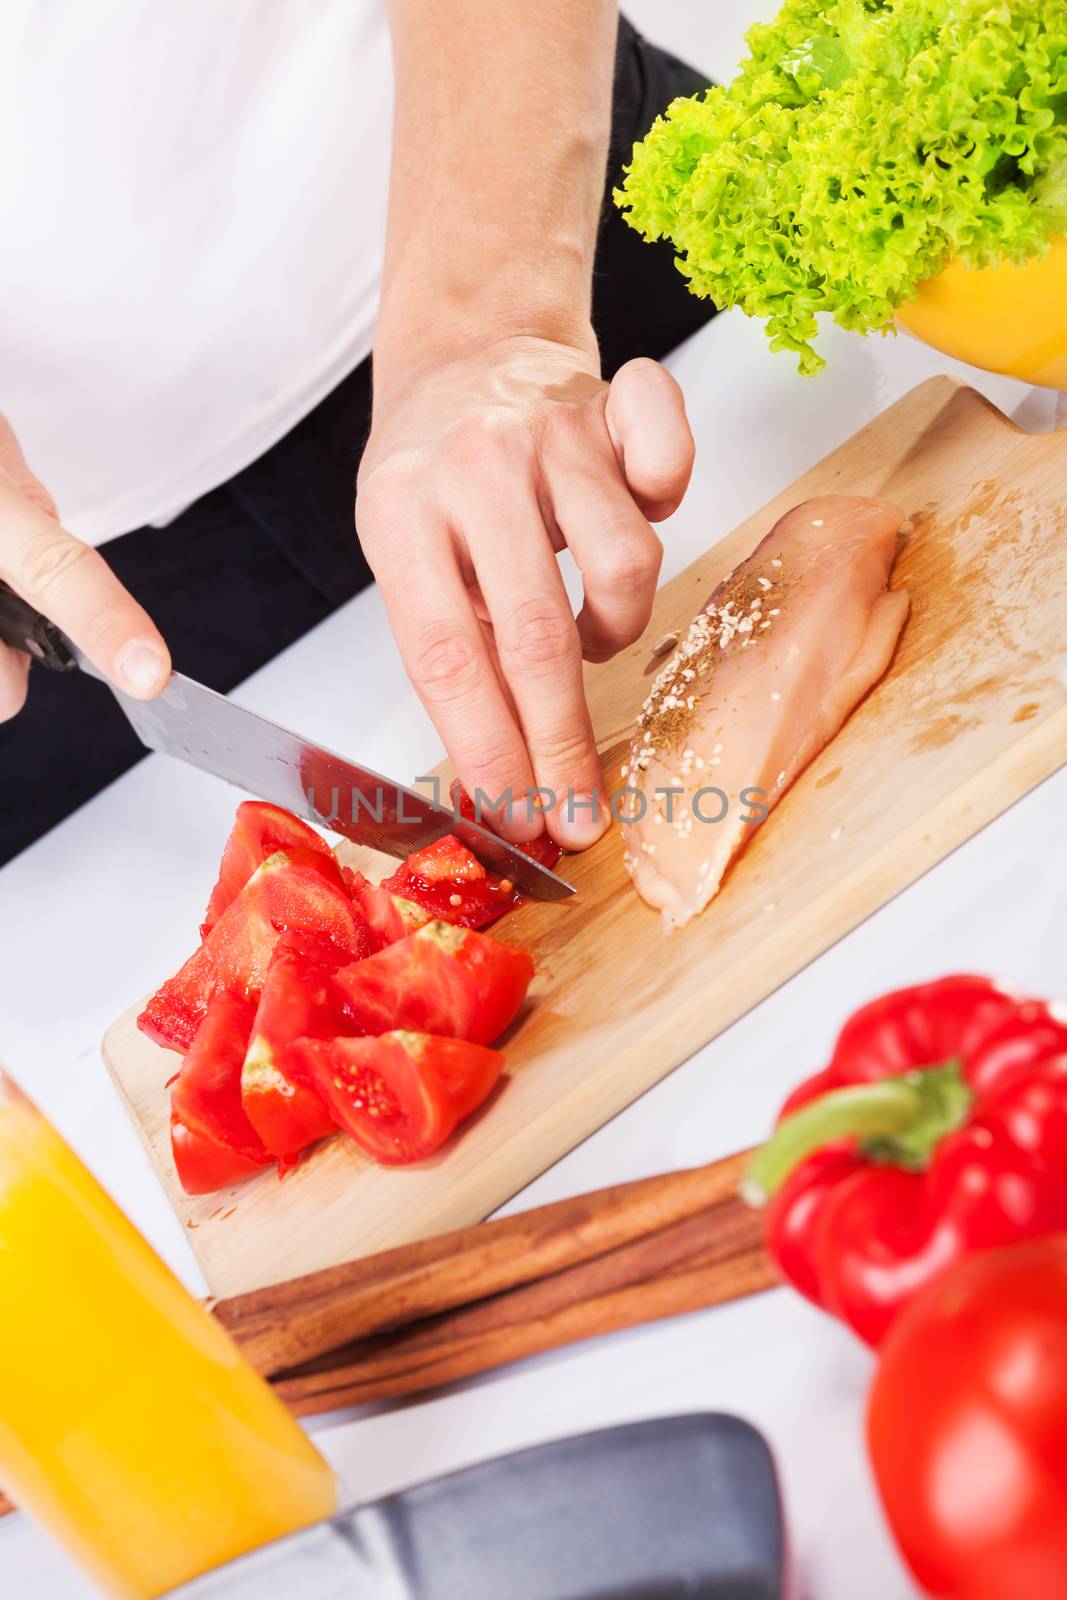 Cutting tomato and chicken breast in the cutting board.